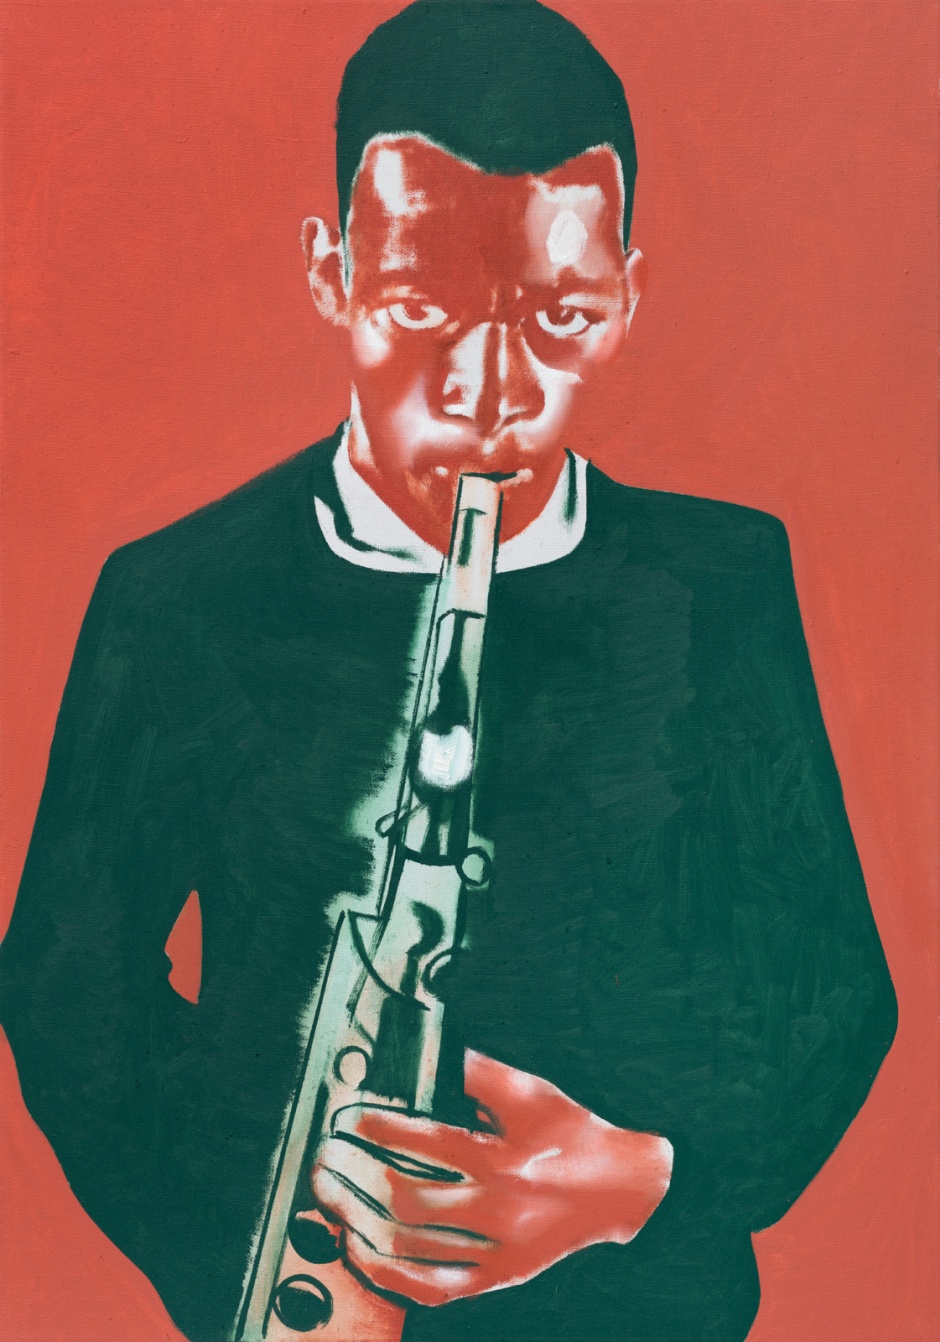 Ornette Coleman, 2020  signed and dated on verso  oil on canvas  100 x 70 x 3 cm / 39 3/8 x 27 1/2 x 1 1/8 in